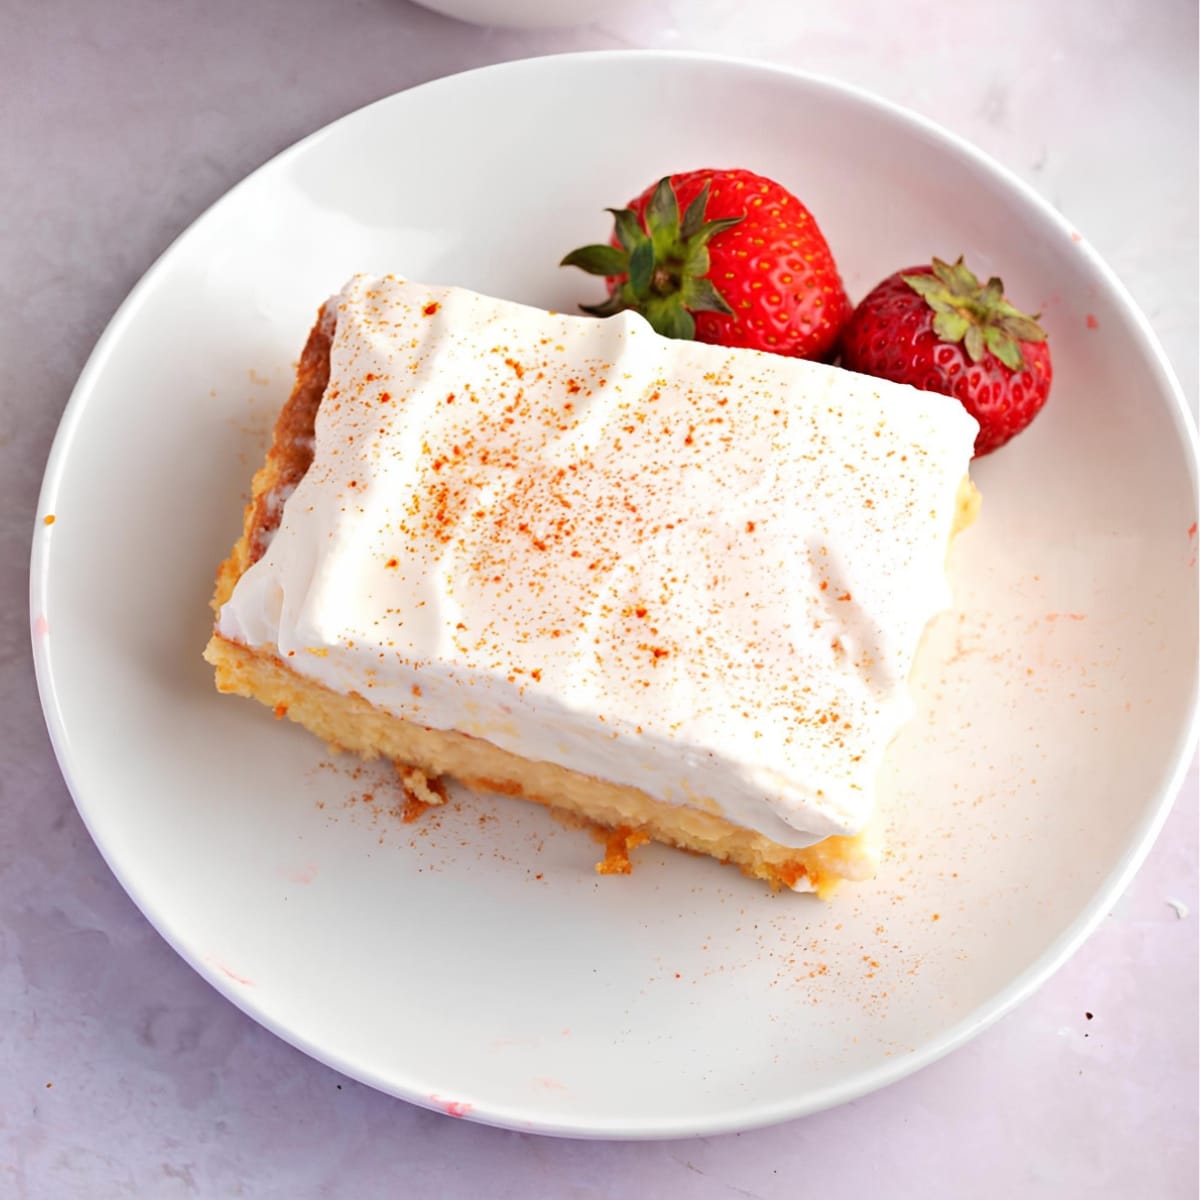 Sweet Pastel de Tres Leches on a Plate Served with Fresh Strawberries